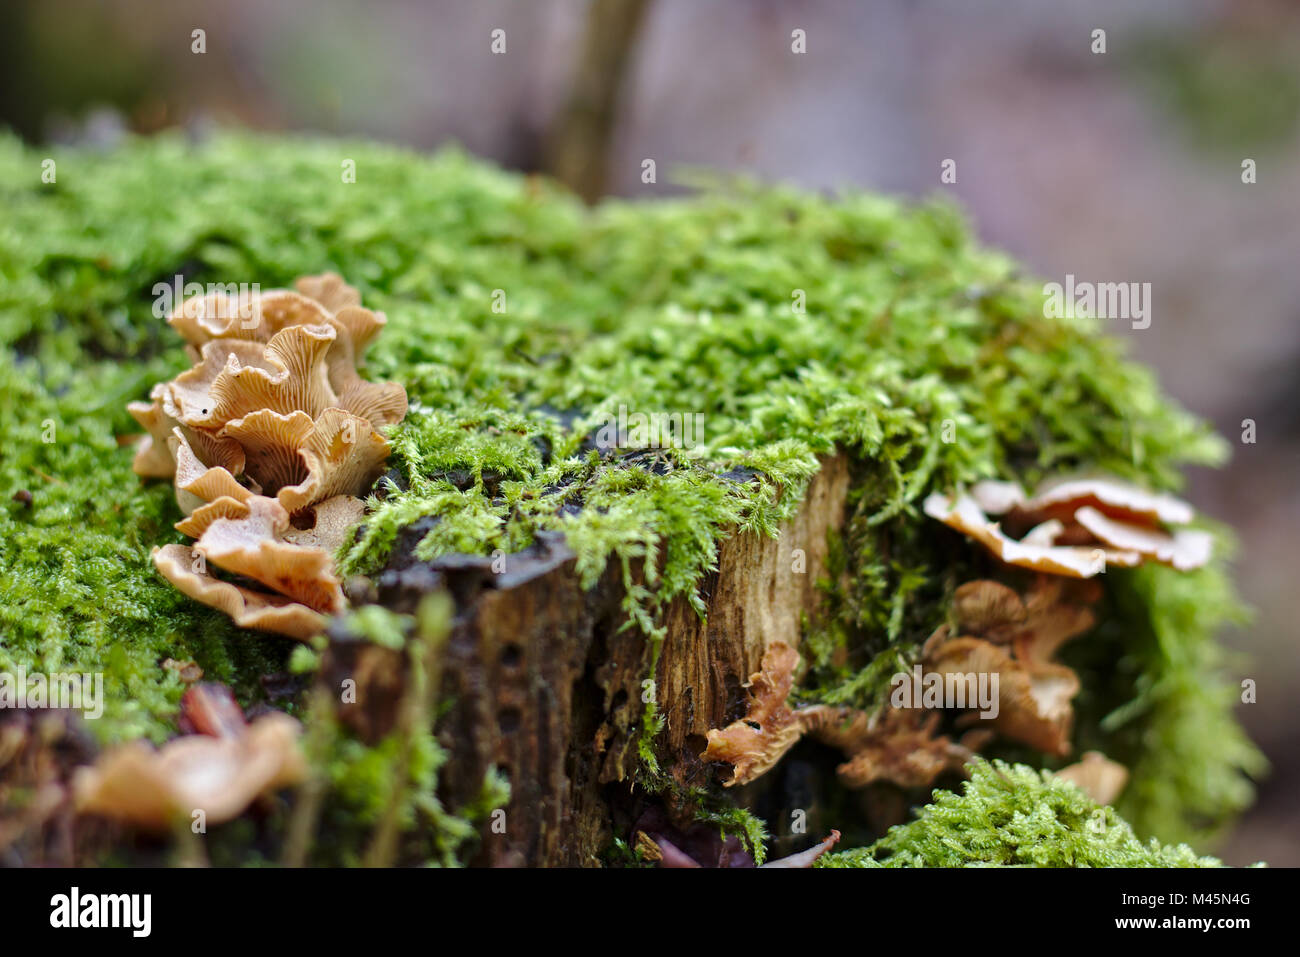 Mossy tree stump with mushrooms growing on top Stock Photo